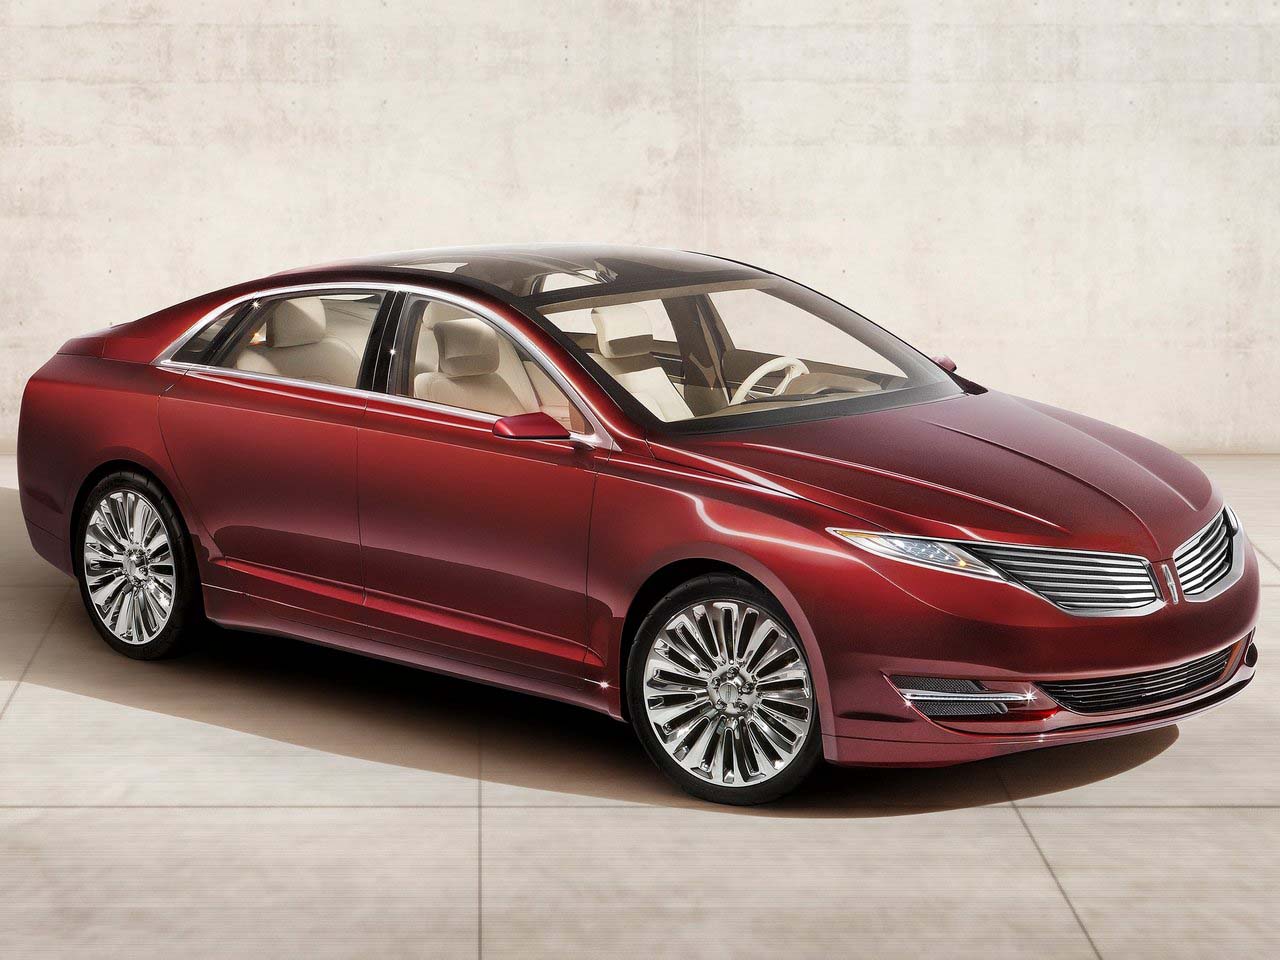 2012 Lincoln MKZ Concept . The Lincoln MKZ Concept, revealed at the ...